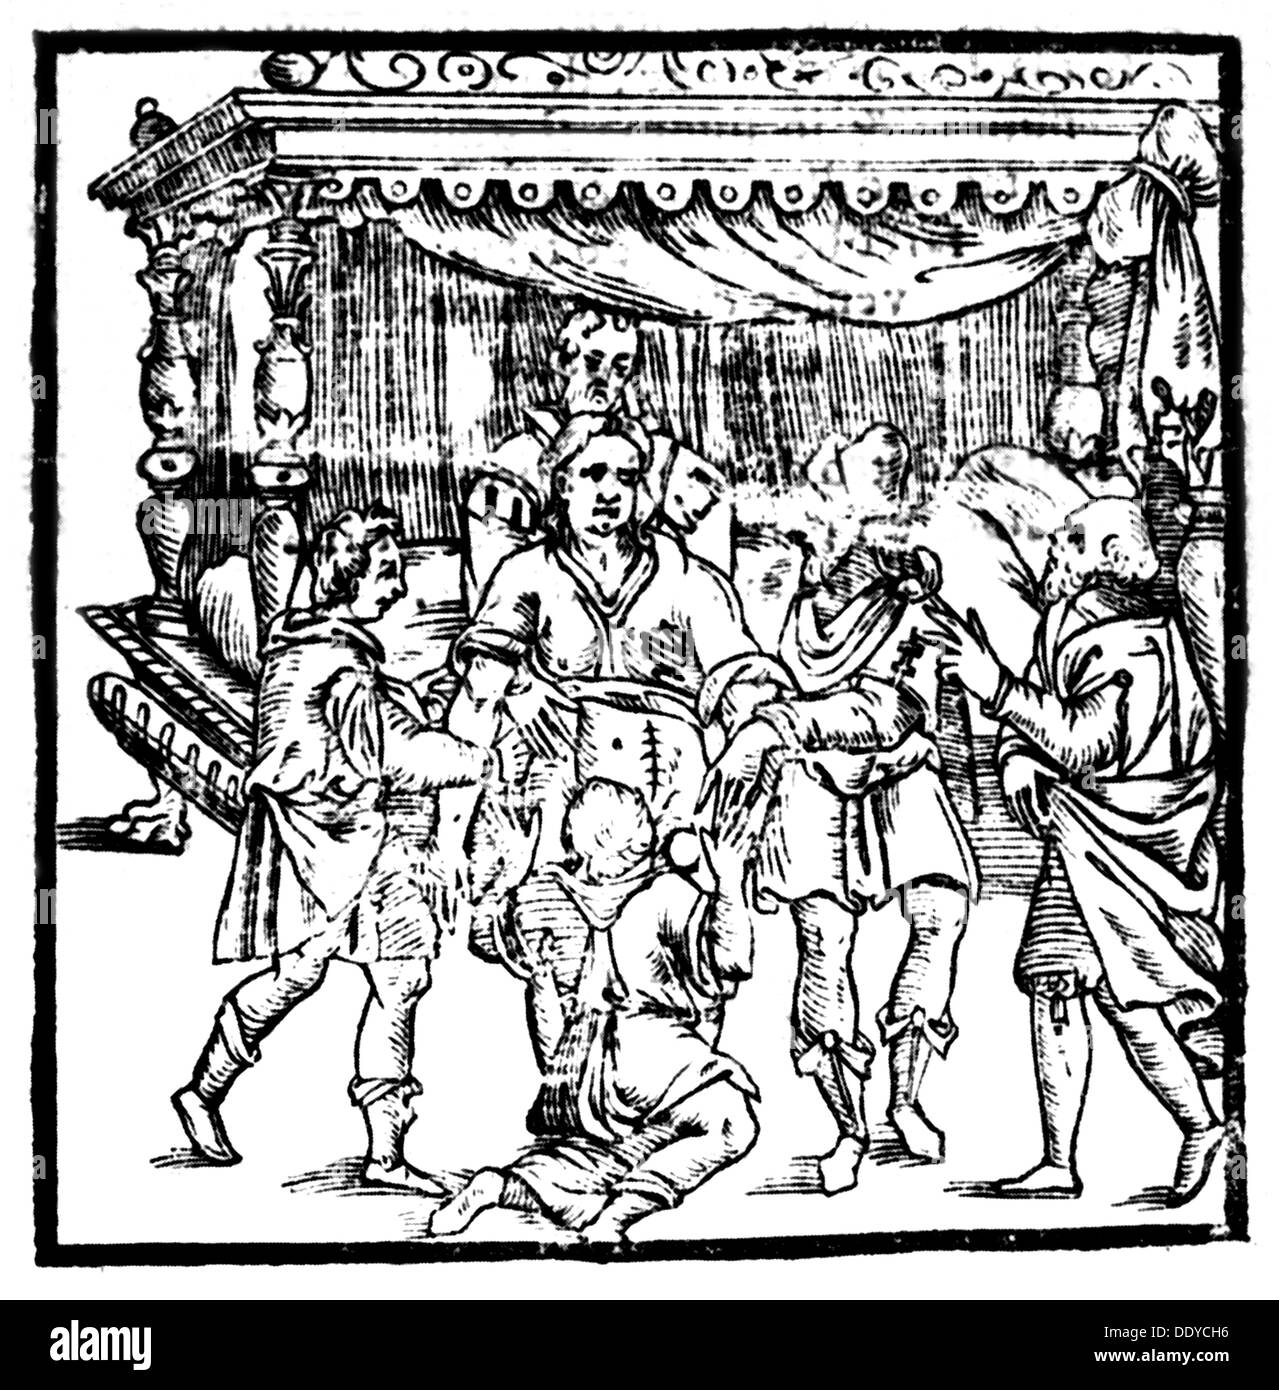 medicine, birth / gynecology, childbearing by means of Caesarean, paturient is being put in a relaxing position, woodcut, out of: Scipione Mercurio, 'La Comare o ricoglitrice', Milan, 1618, Additional-Rights-Clearences-Not Available Stock Photo